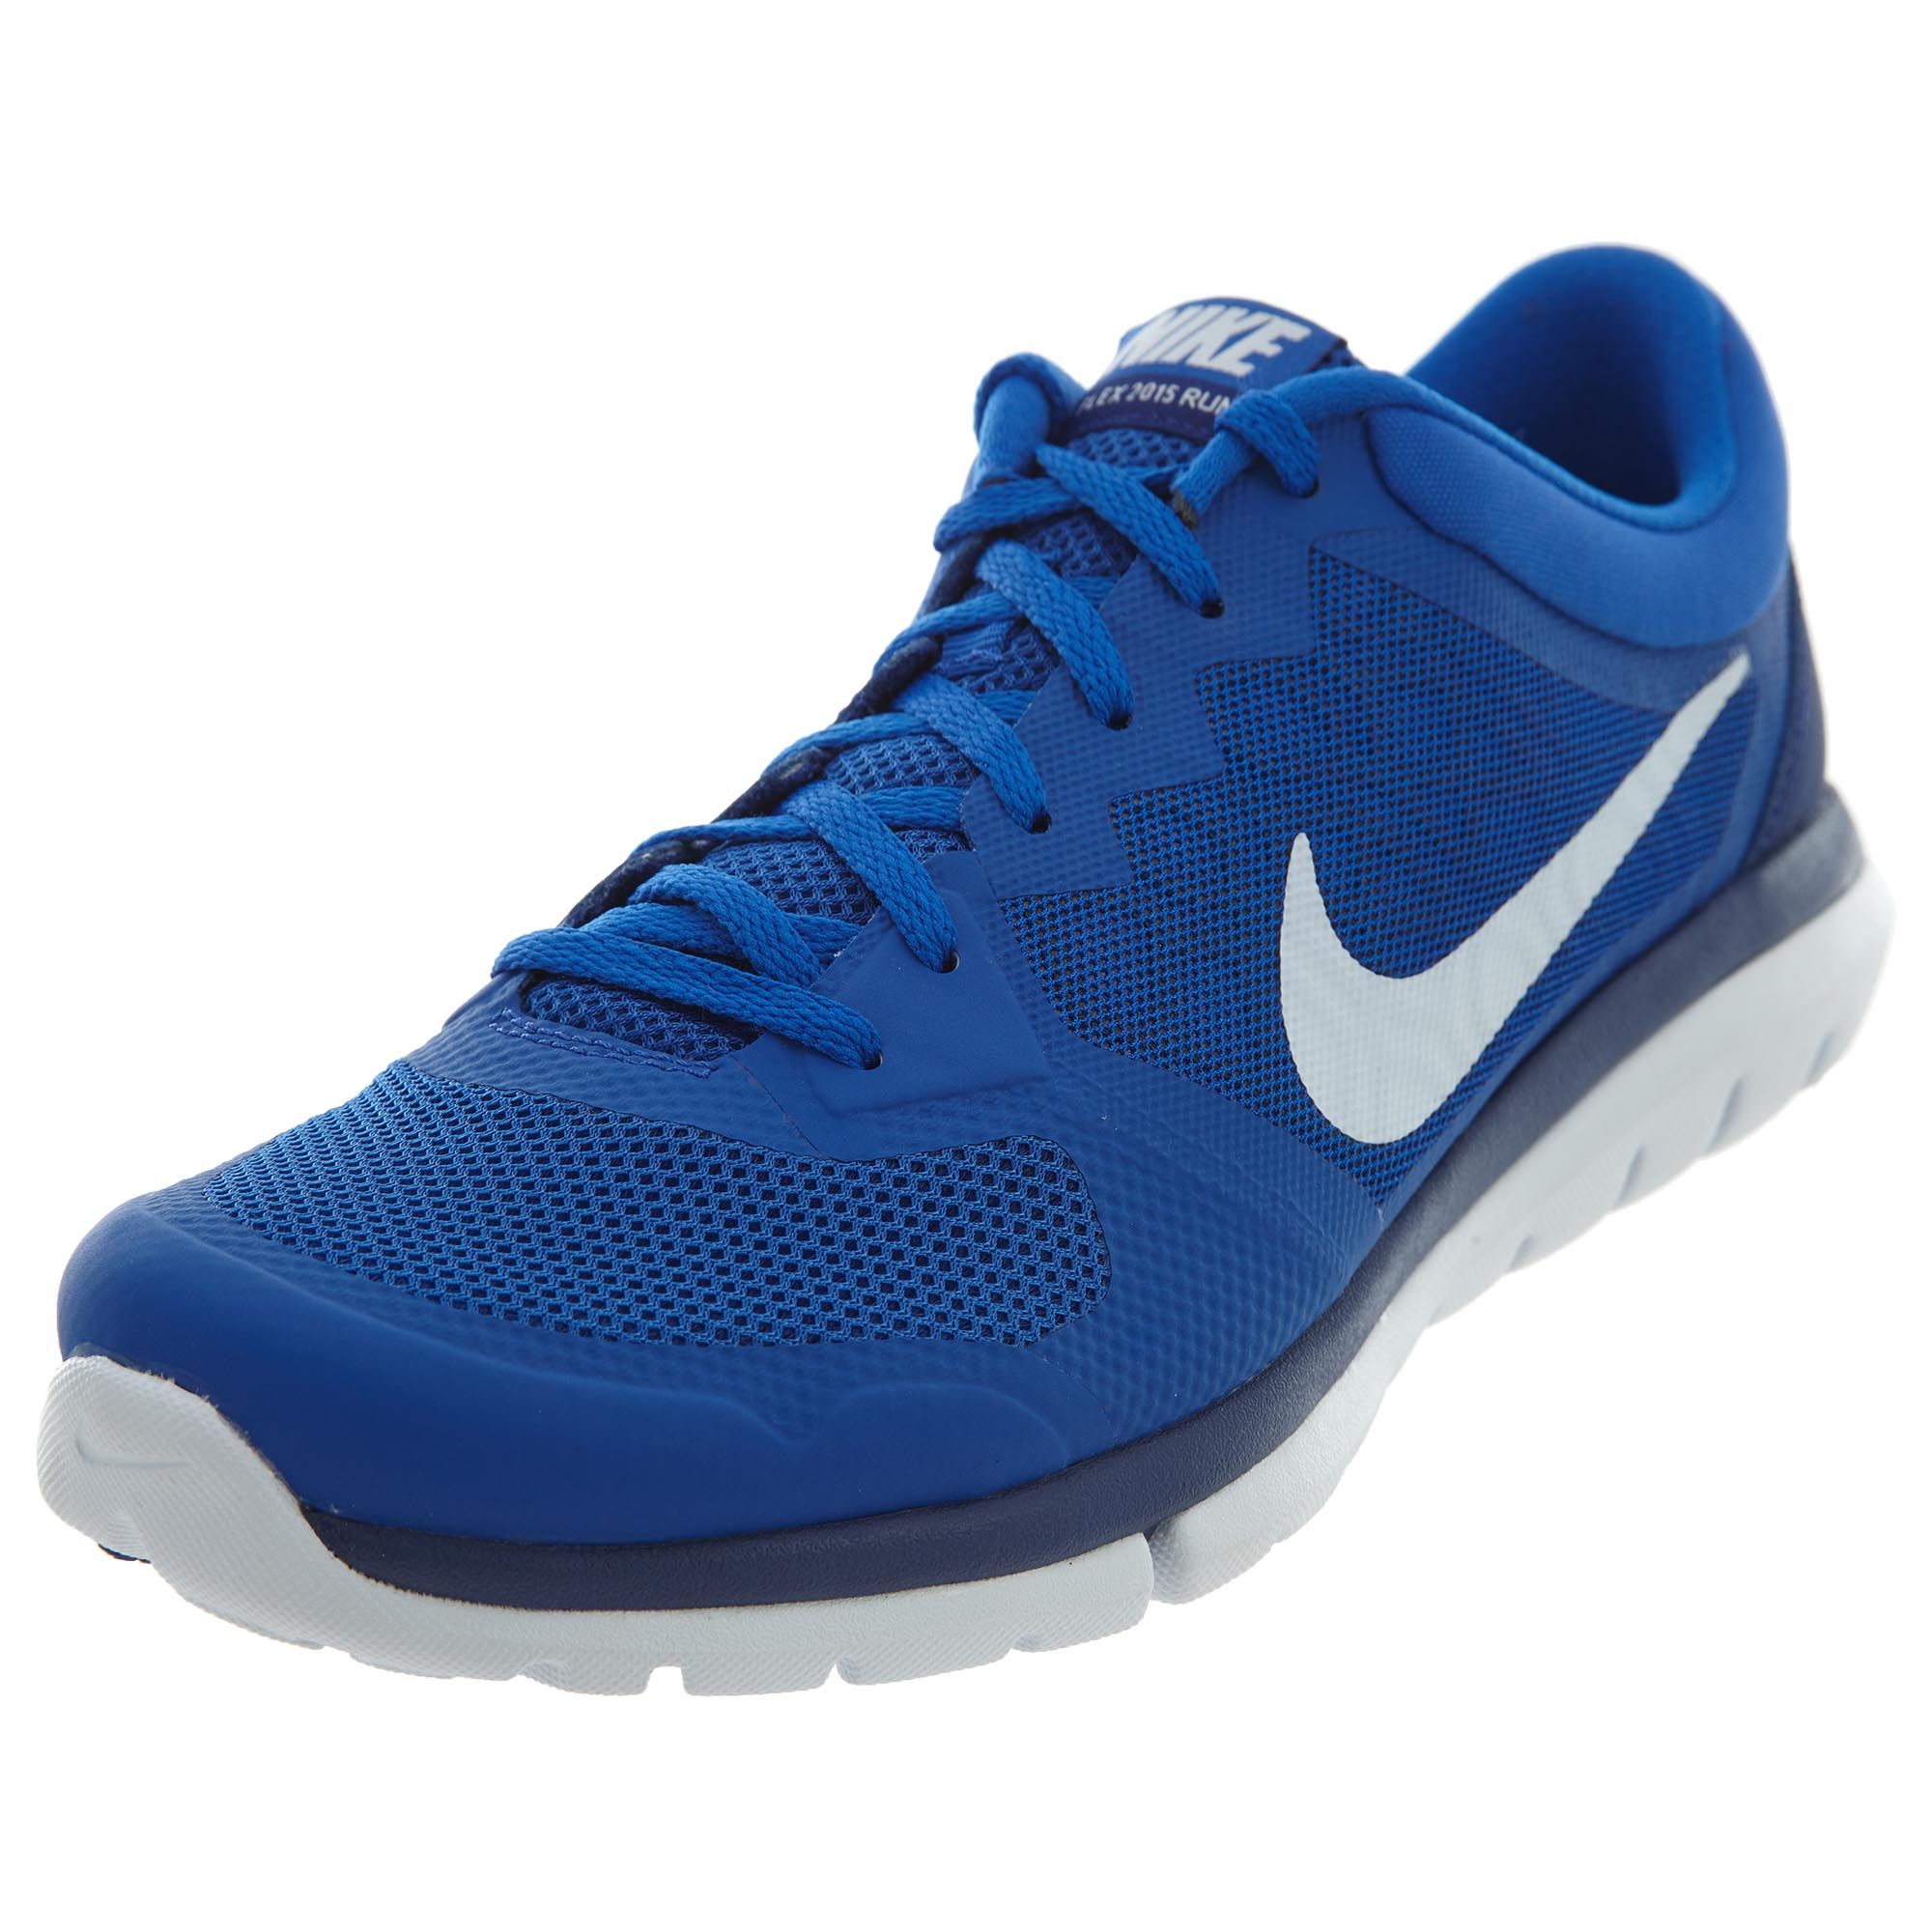 Nike Flex 2015 Running Shoes Mens Style : 709022-400